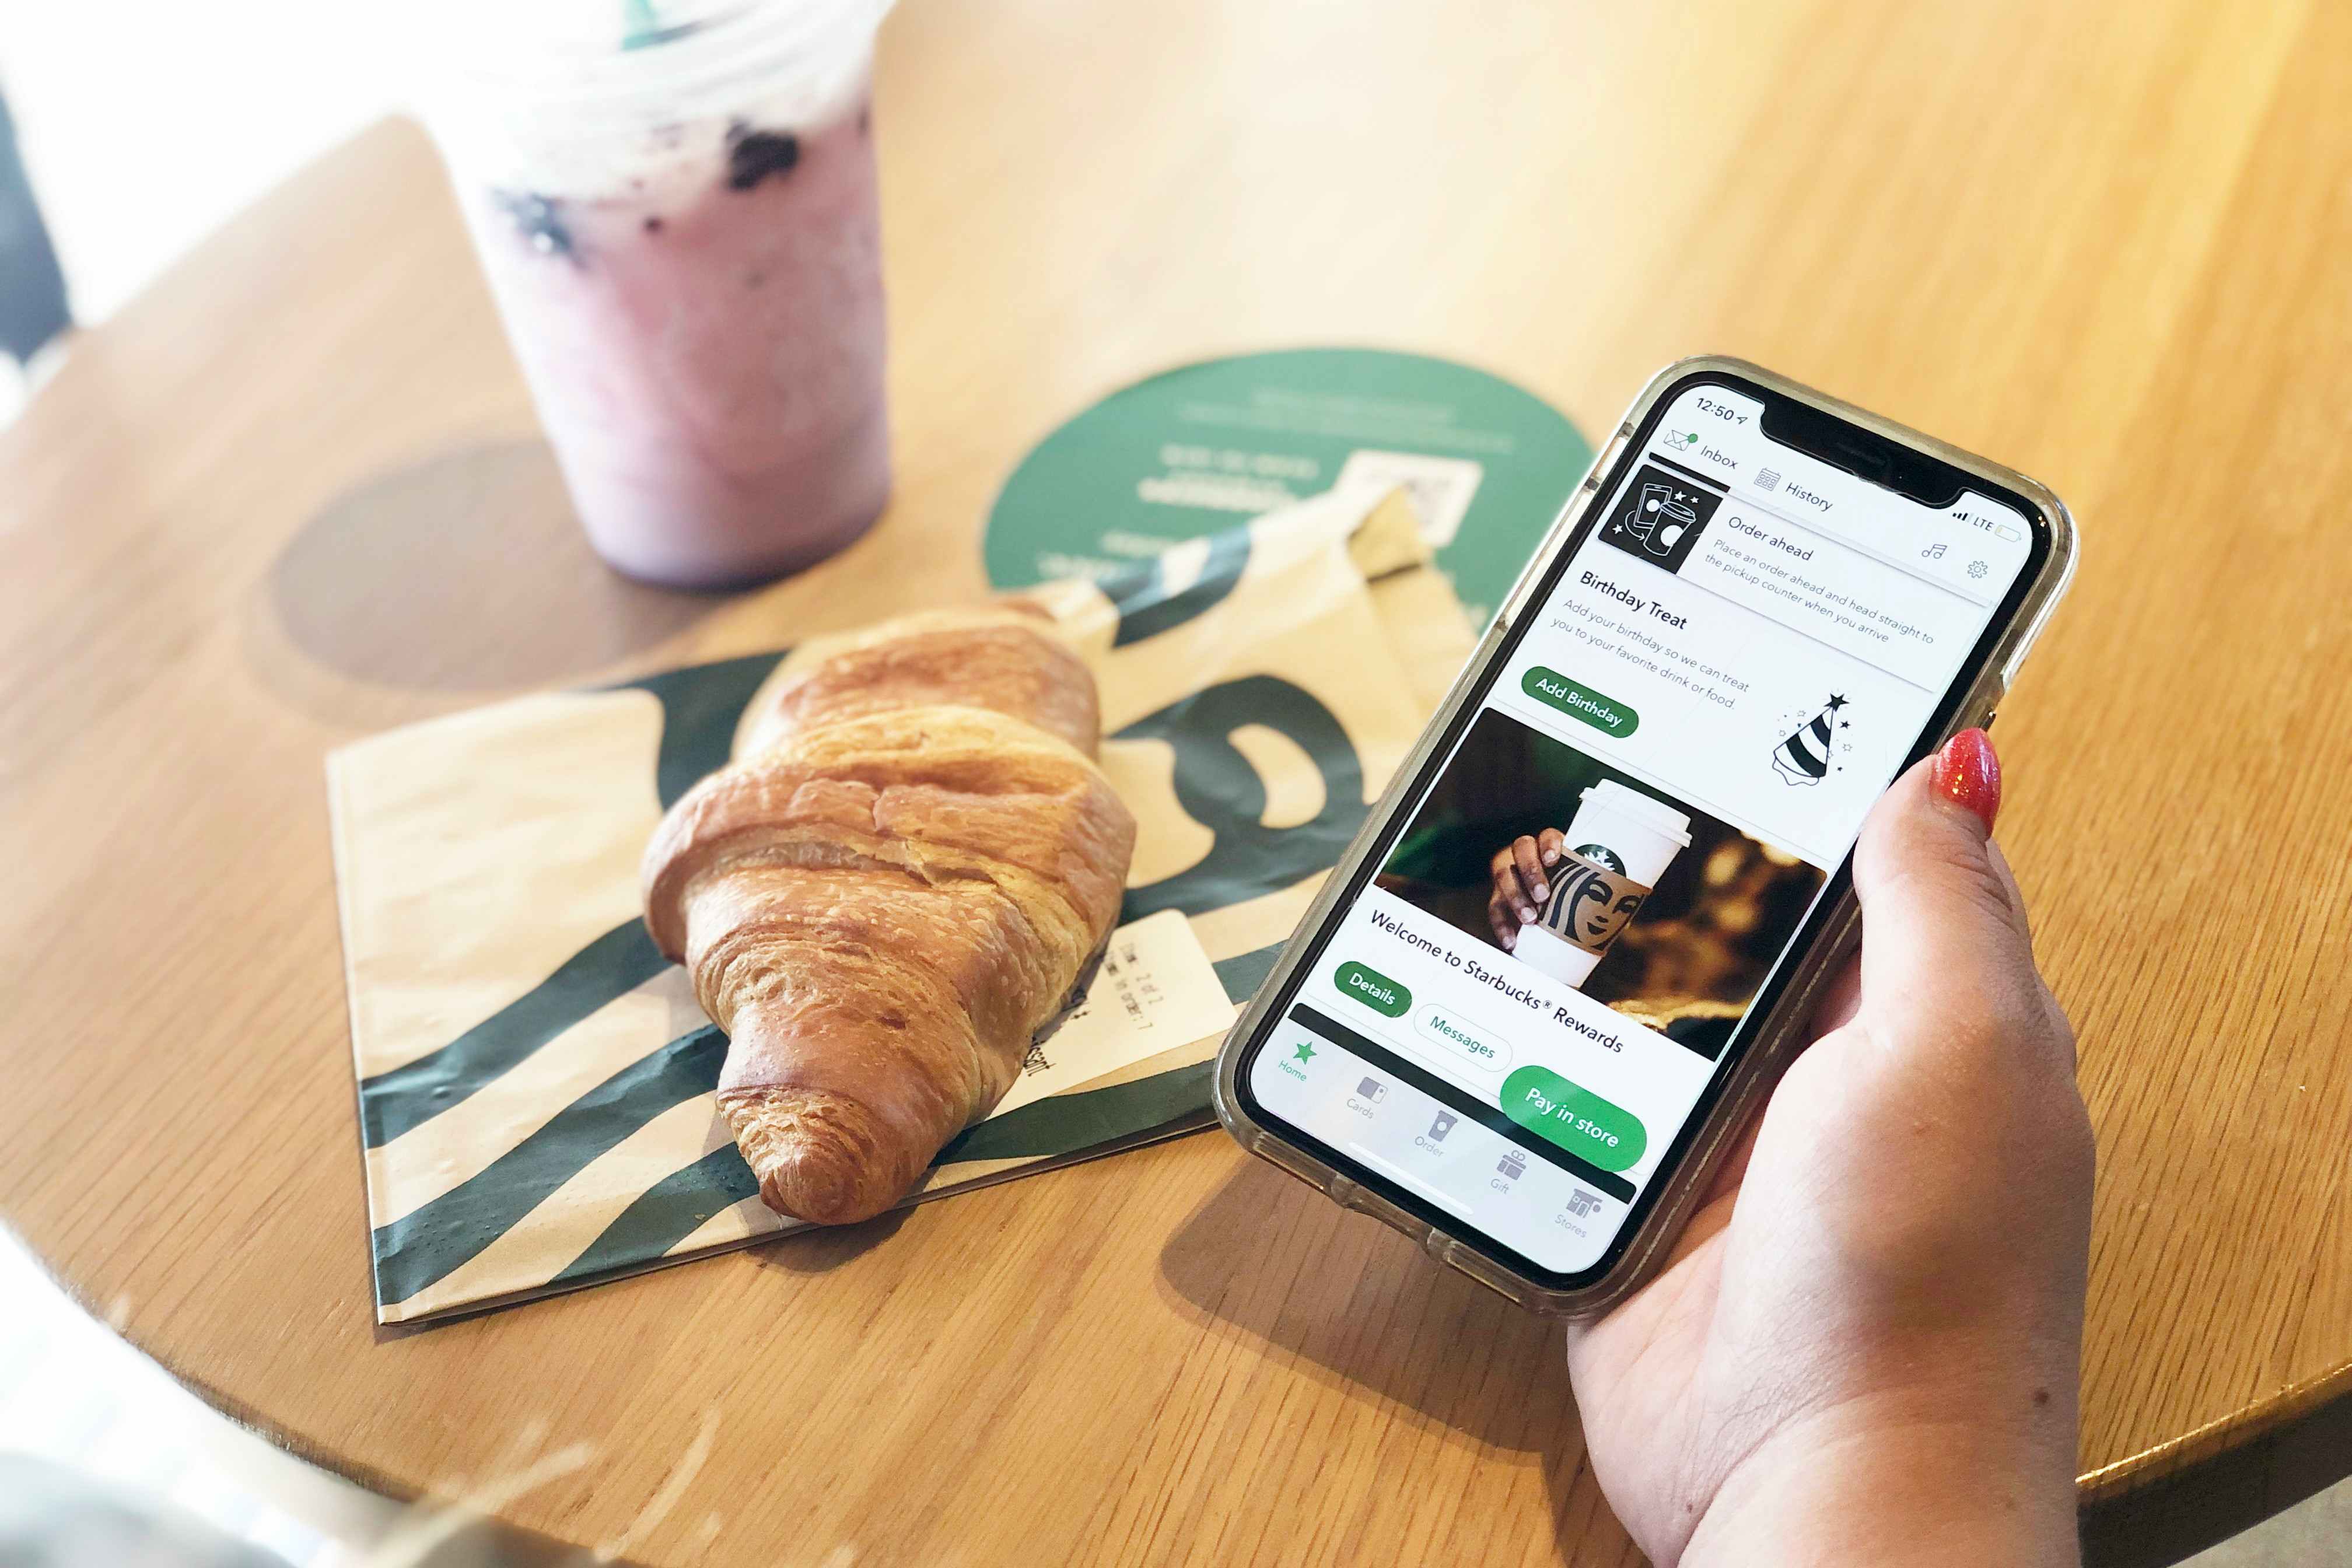 Download the Starbucks app for freebies and rewards.